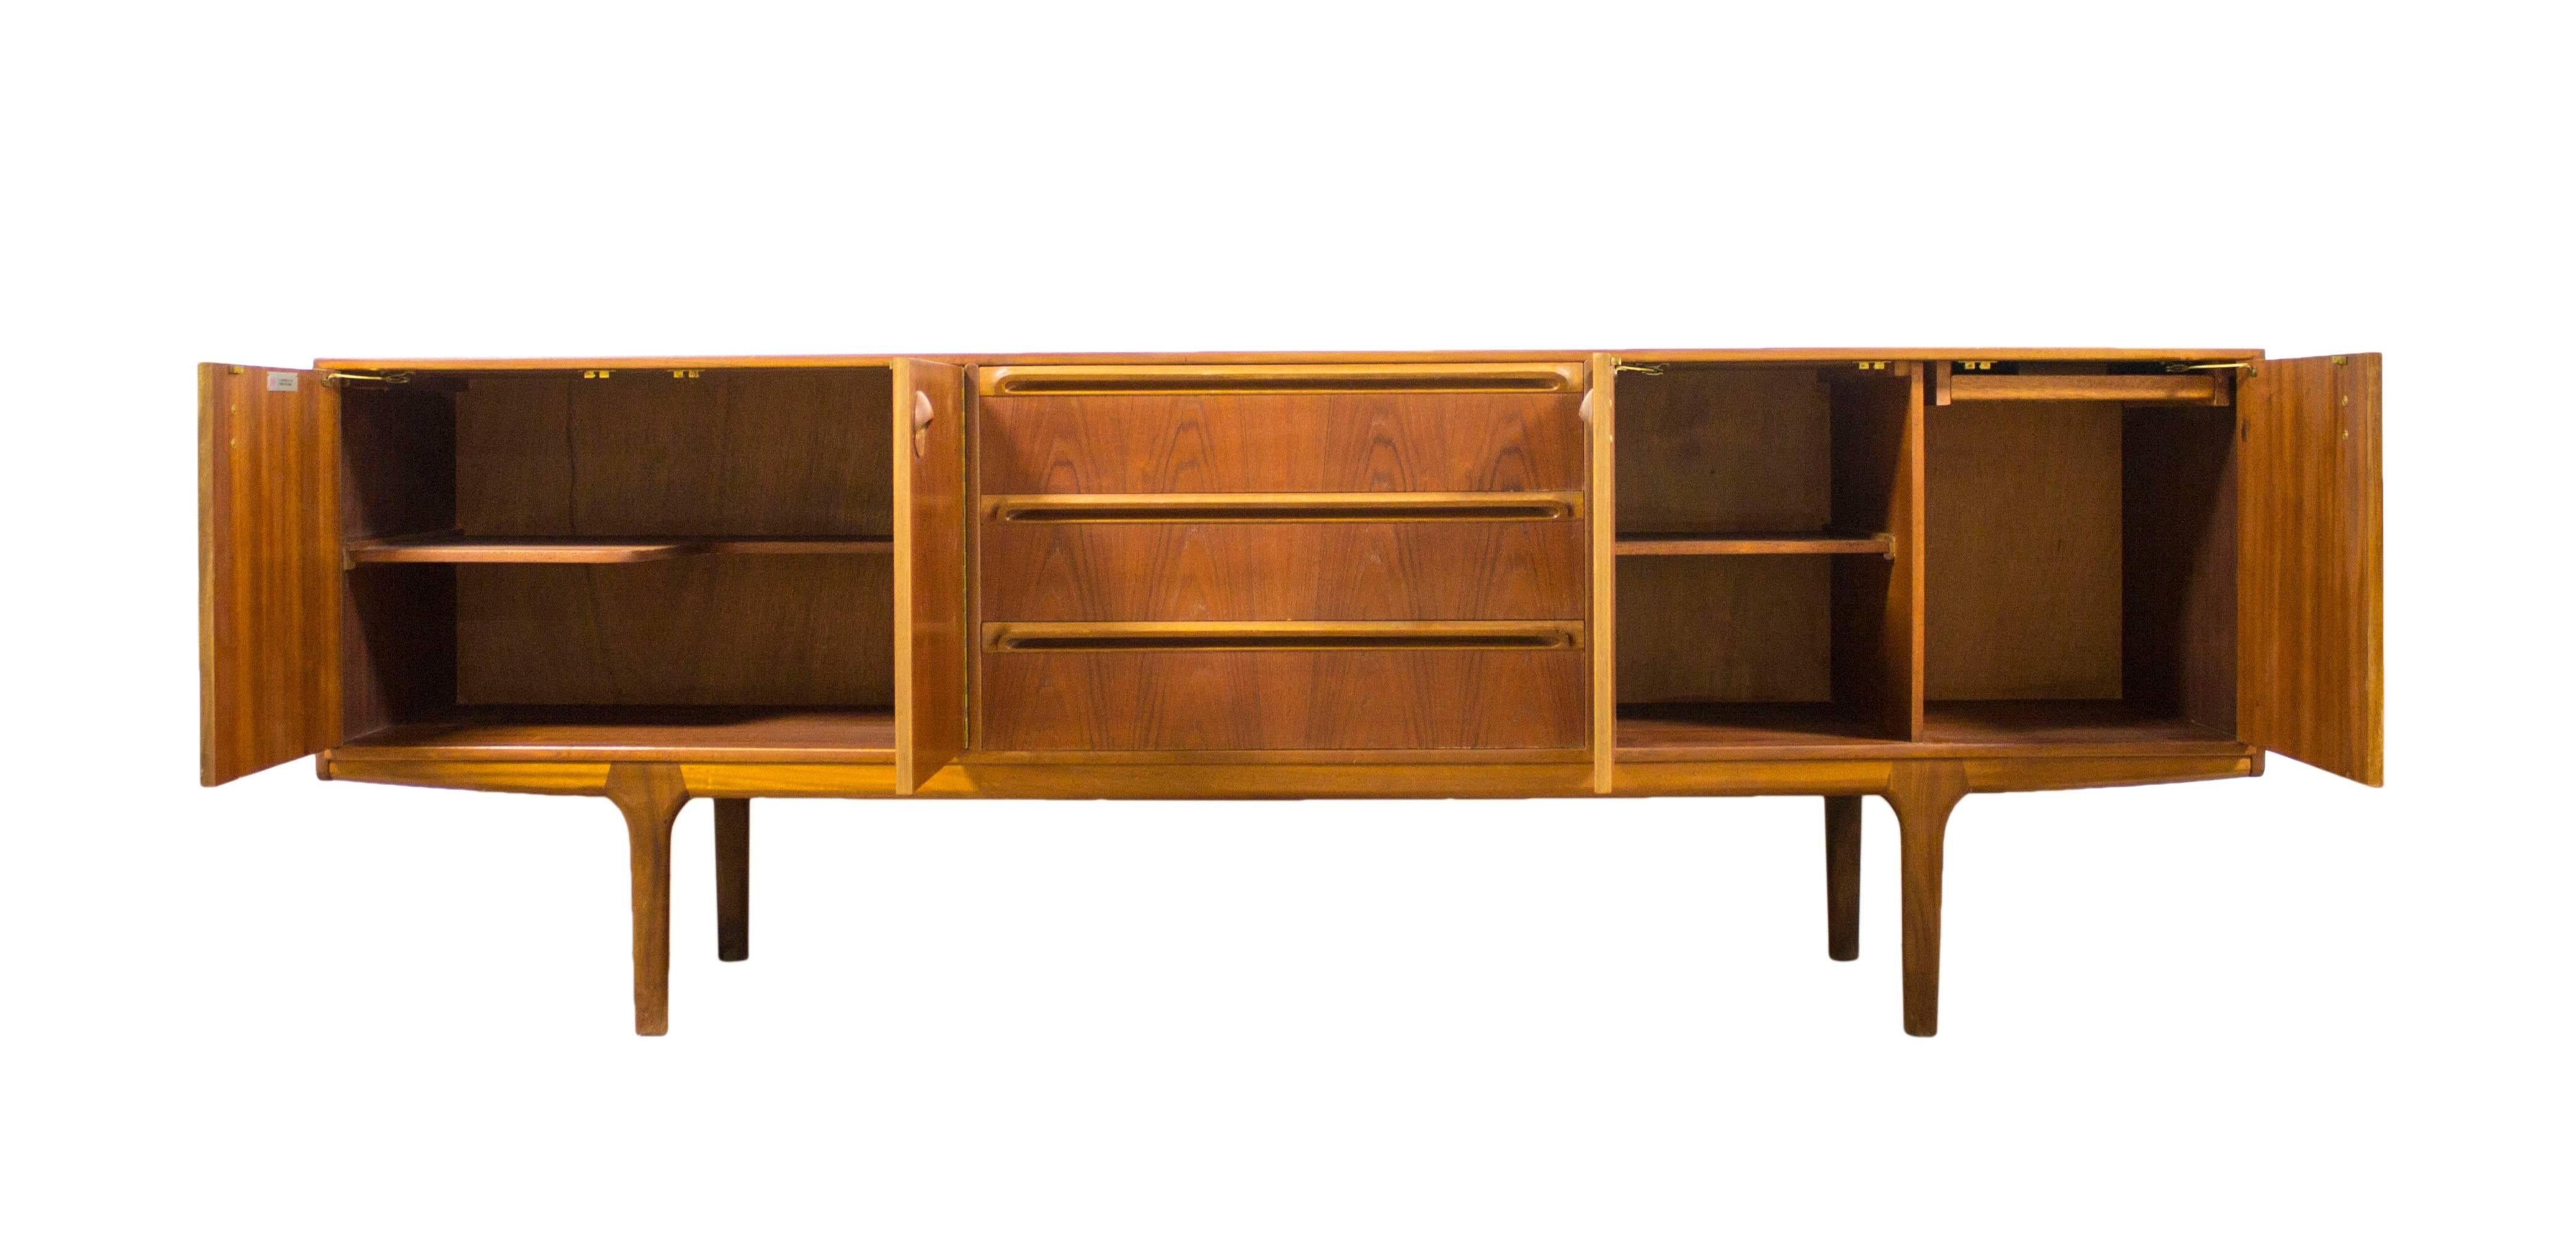 McIntosh of Kirkcaldy arguably are one of the best of not the best of the British Mid-Century designers creating some of the most high quality and desirable furniture of the period.

This stunning teak sideboard with it’s large side cupboards